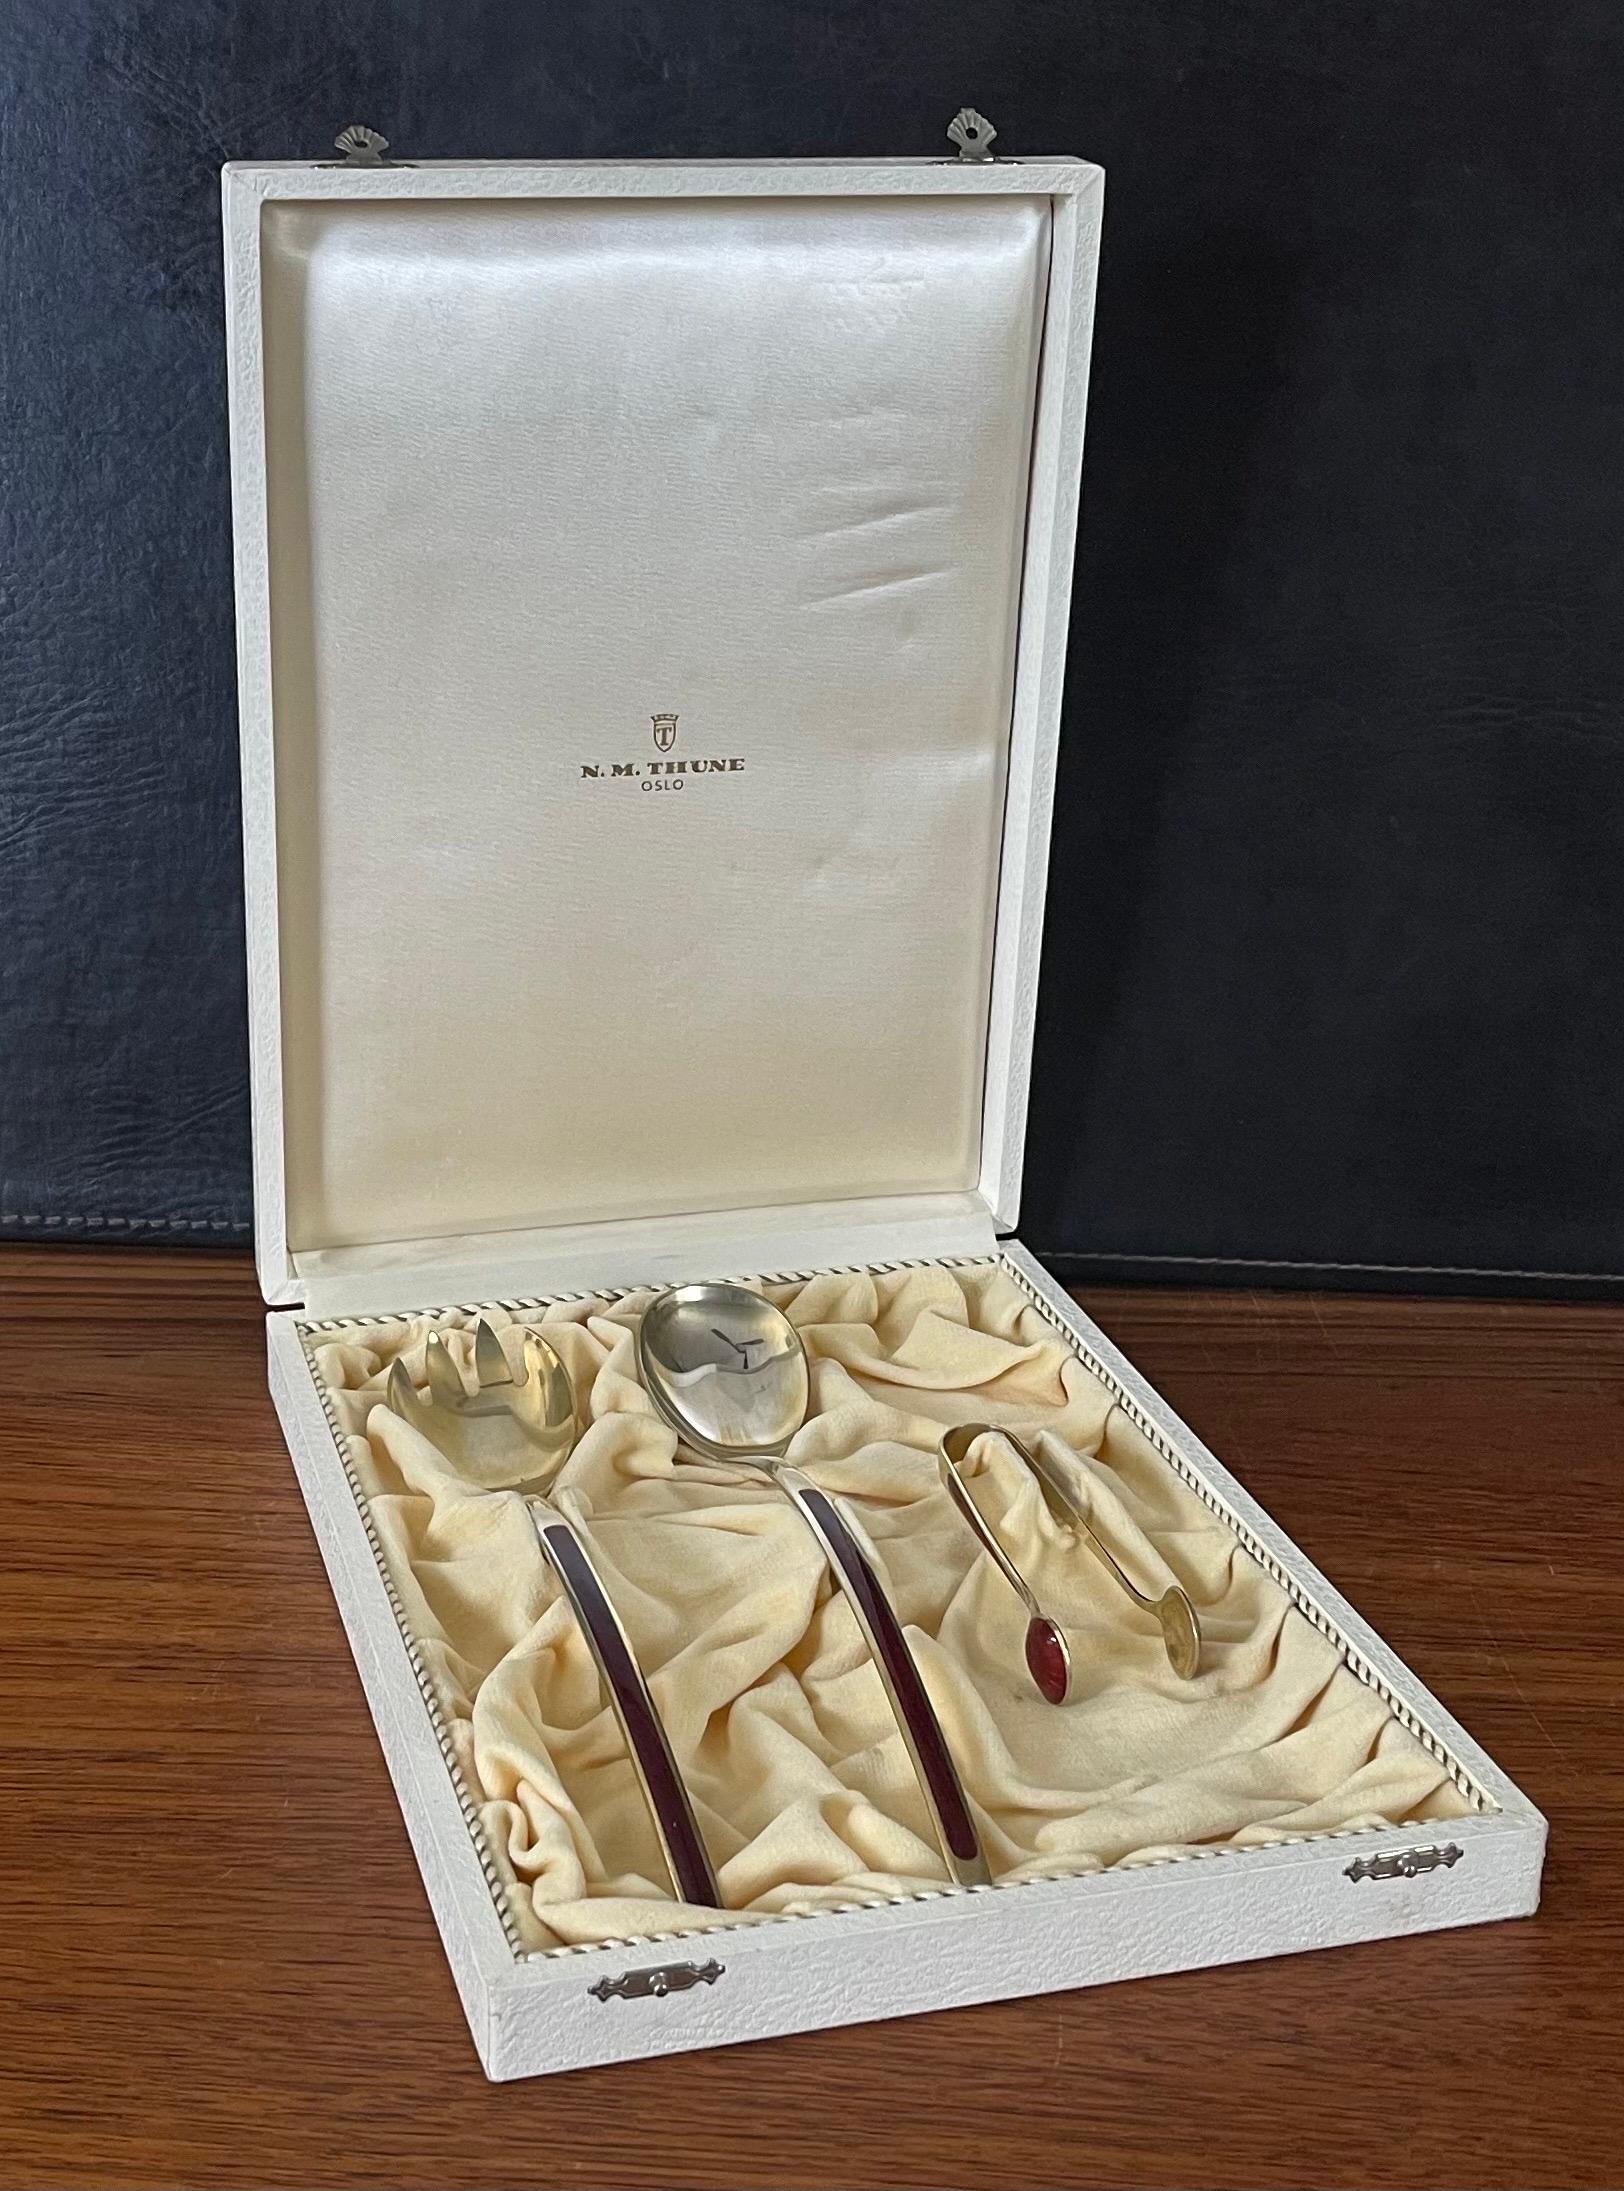 MCM Stylized Set of Salad Servers in Sterling Silver and Enamel by N.M. Thune For Sale 8